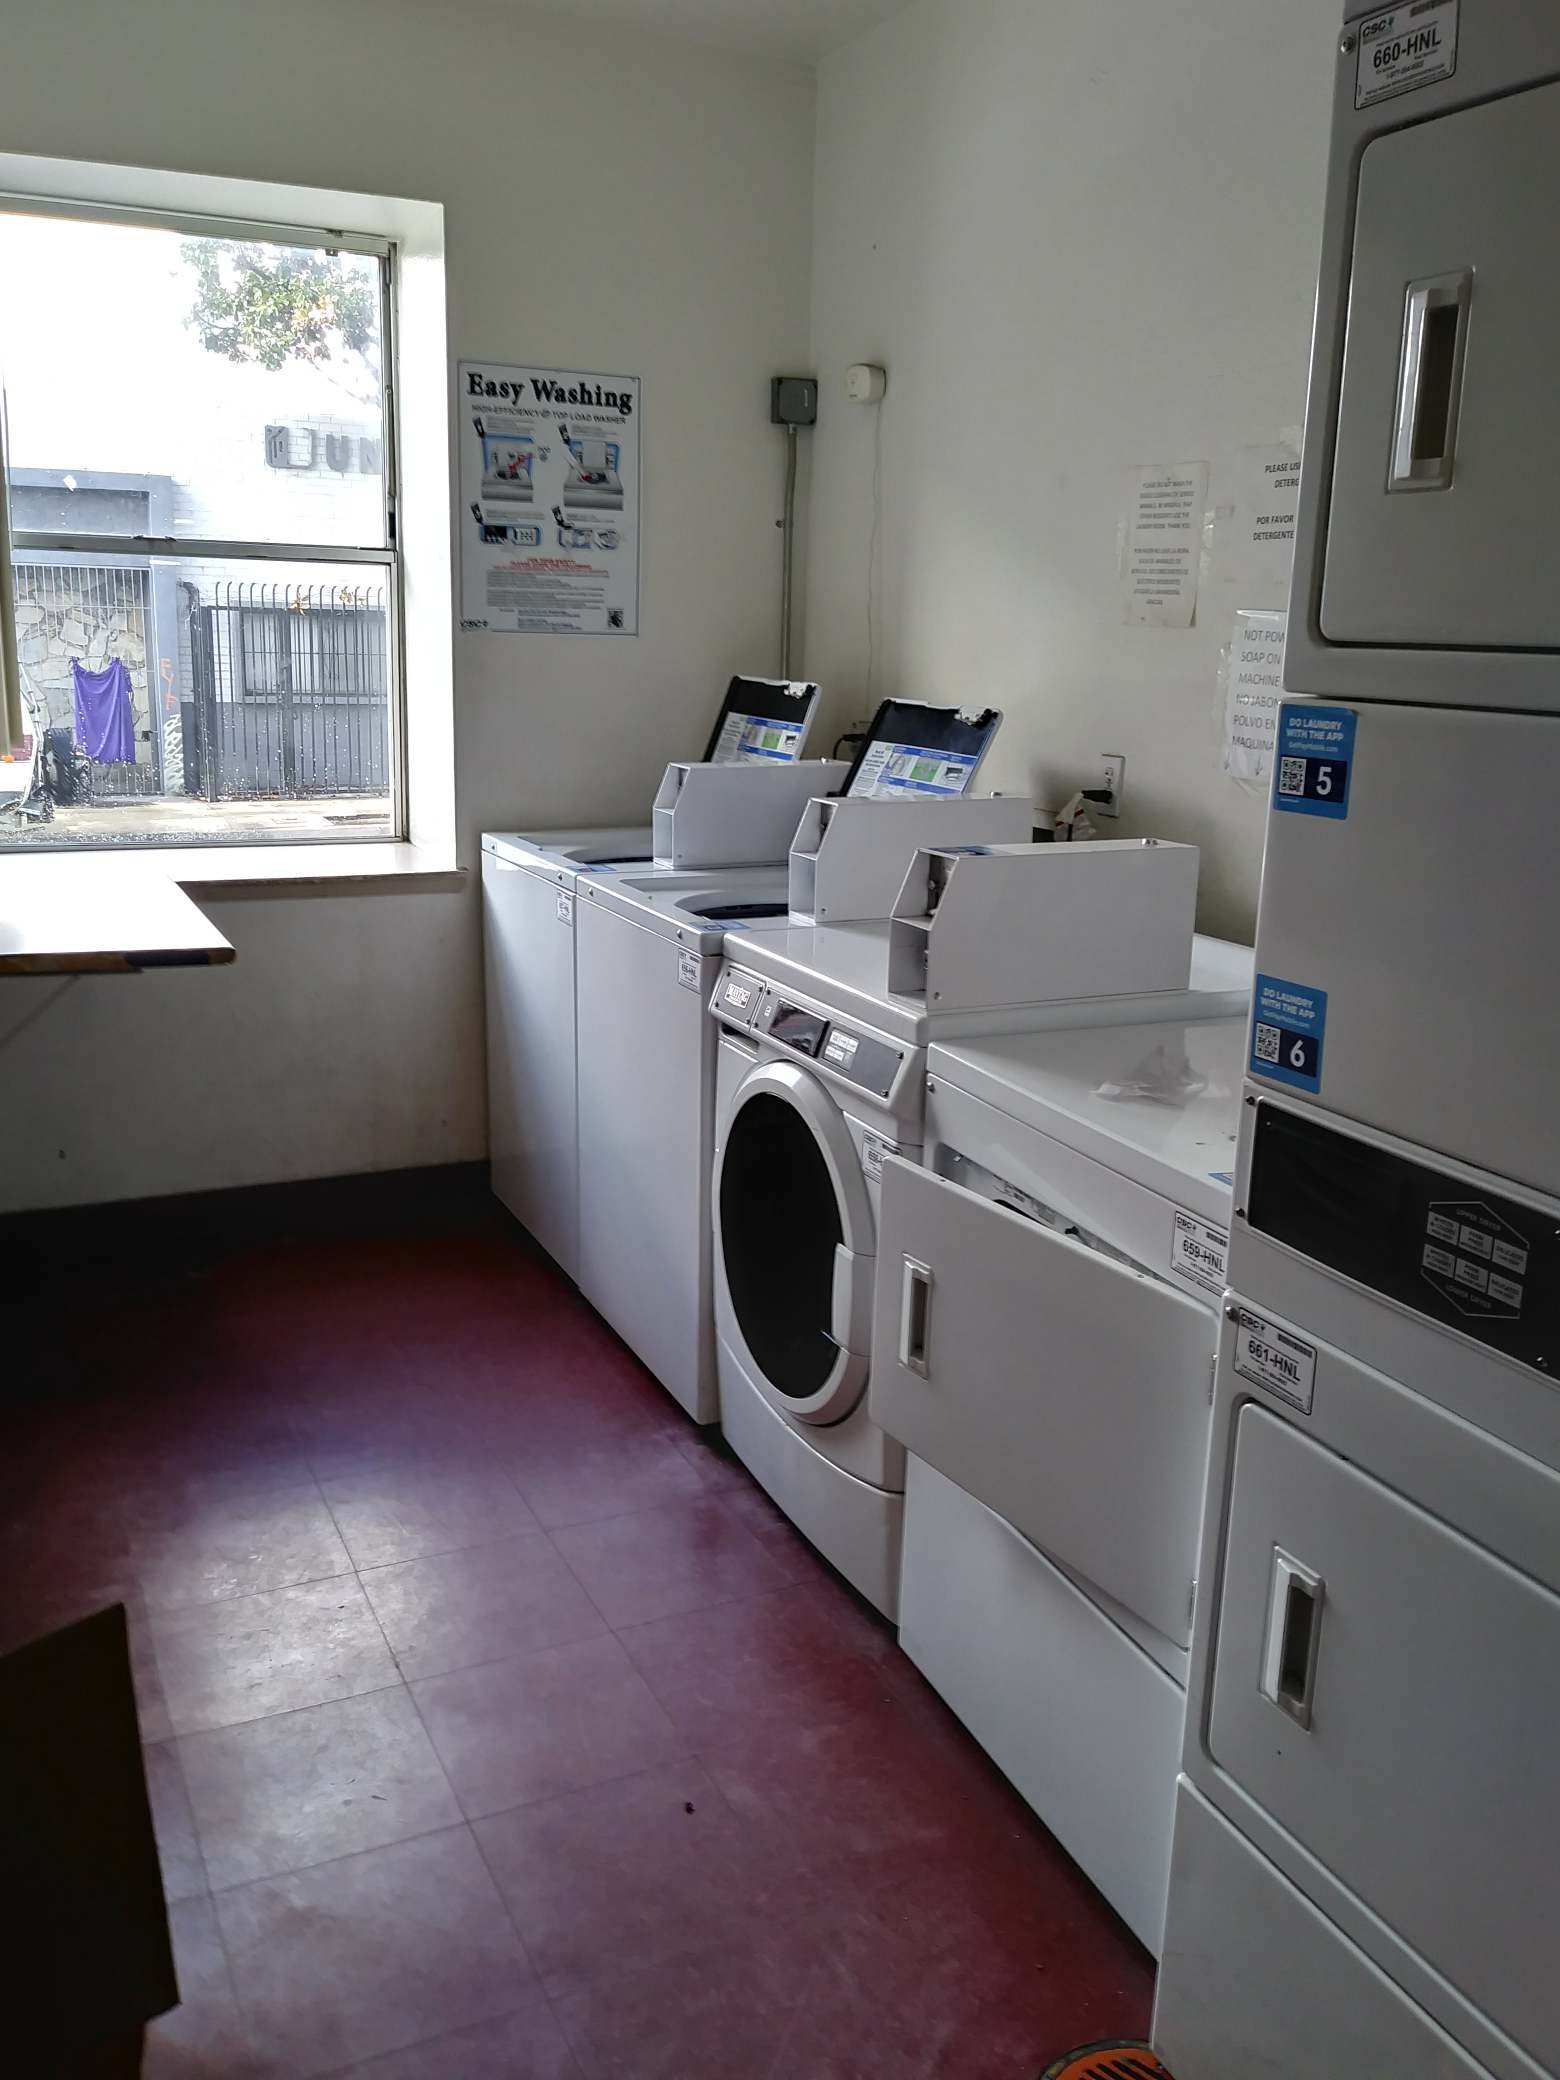 Photo of Laundry Room showing washing machines and heaters